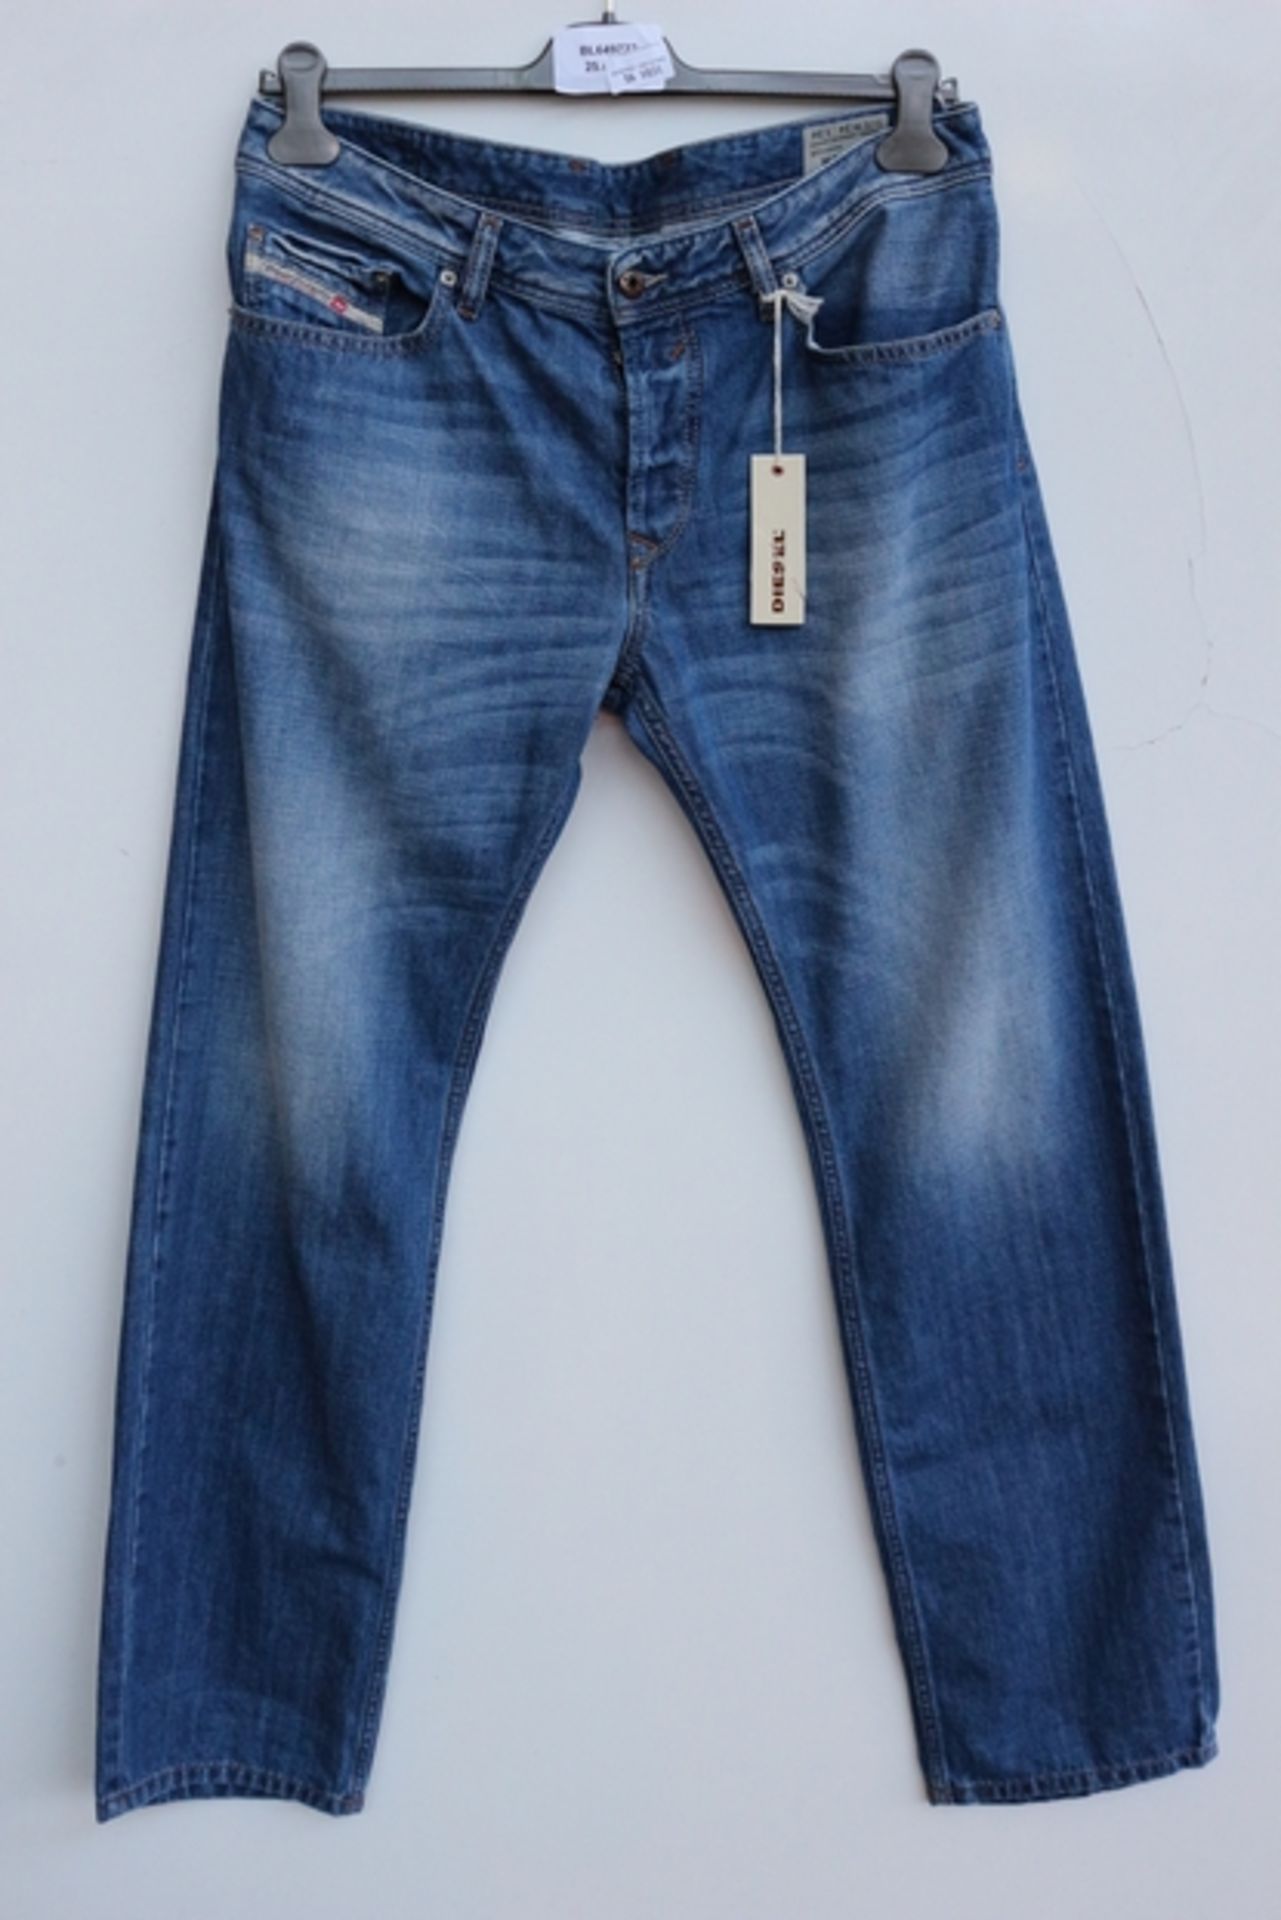 1X PAIR OF DIESEL WAYKEE JEANS SIZE 34 BY 34 RRP £100 (BL649722)